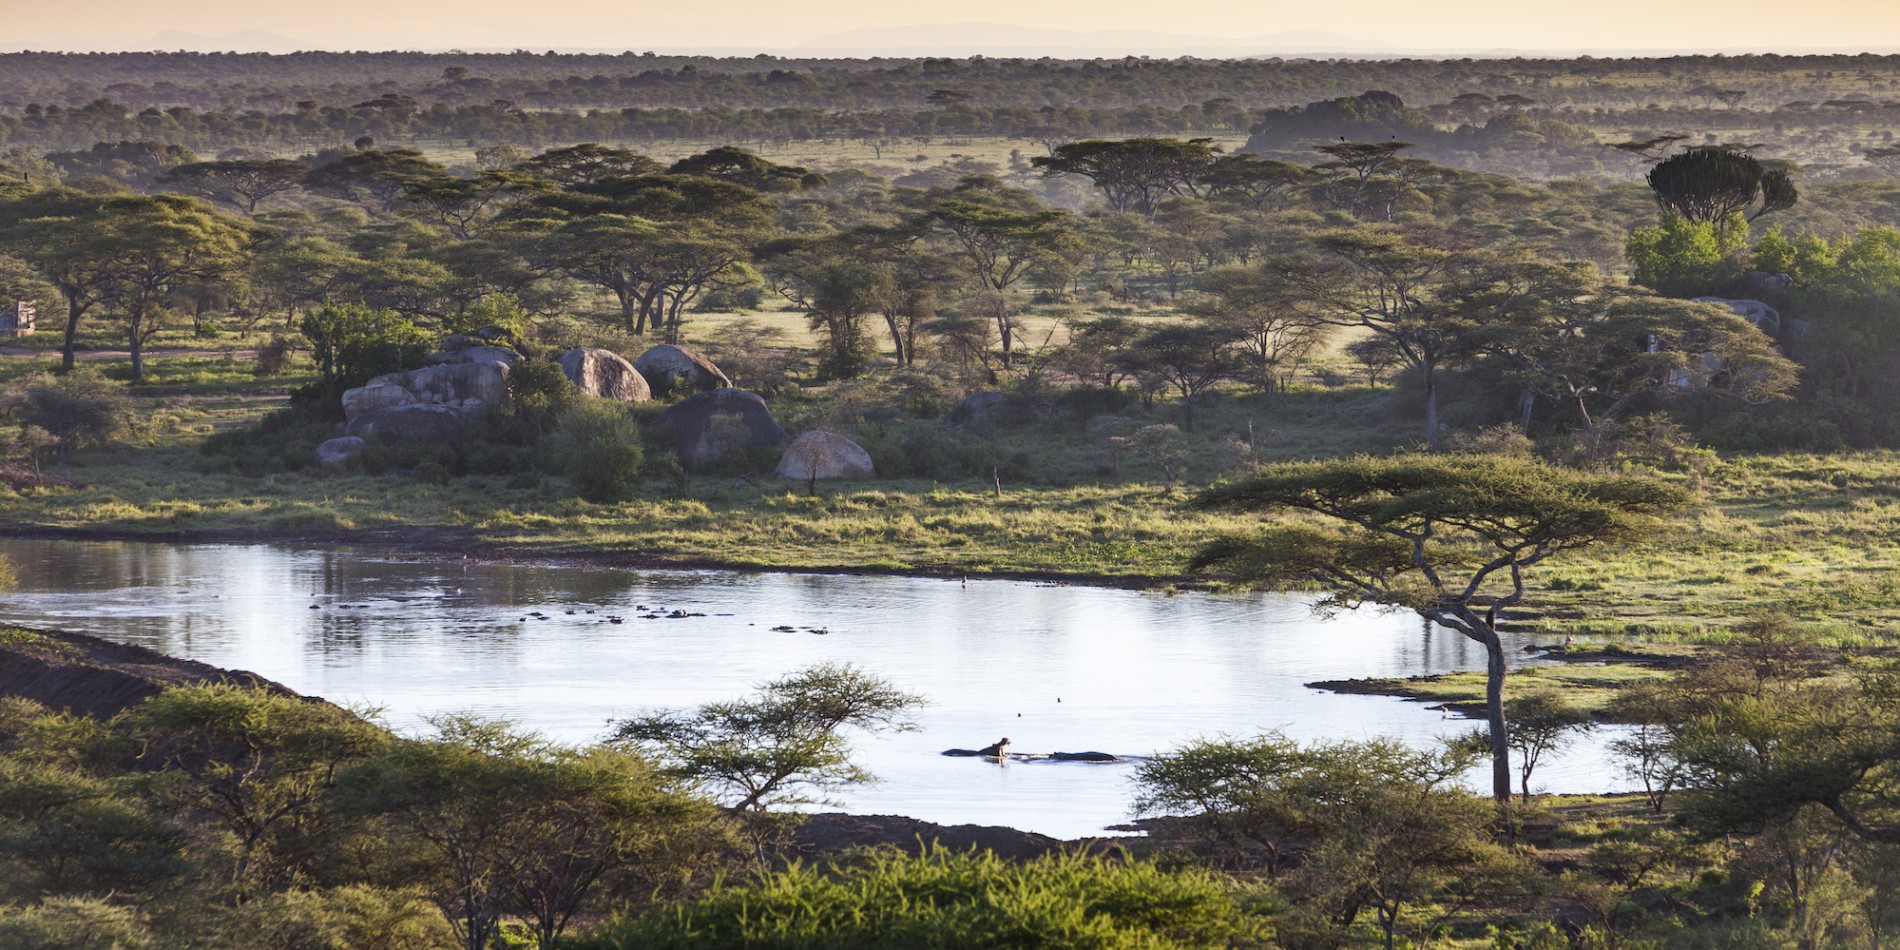 Vast shot of a nature reserve in Tanzania with a small pond surrounded by trees with a hippo swimming